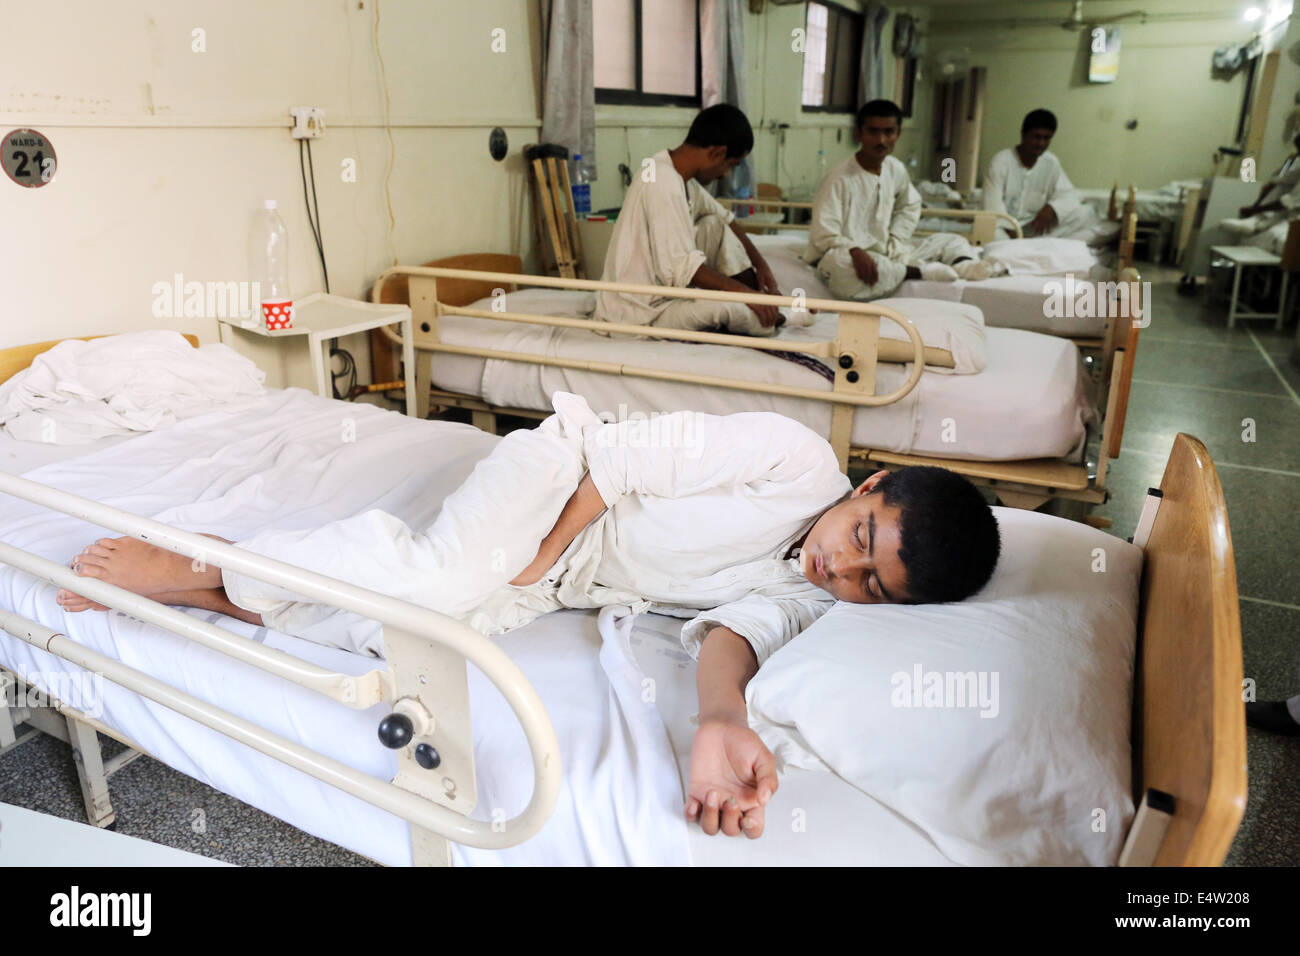 Leprosy patients in the Marie Adelaide Leprosy Centre, Karachi, Pakistan Stock Photo